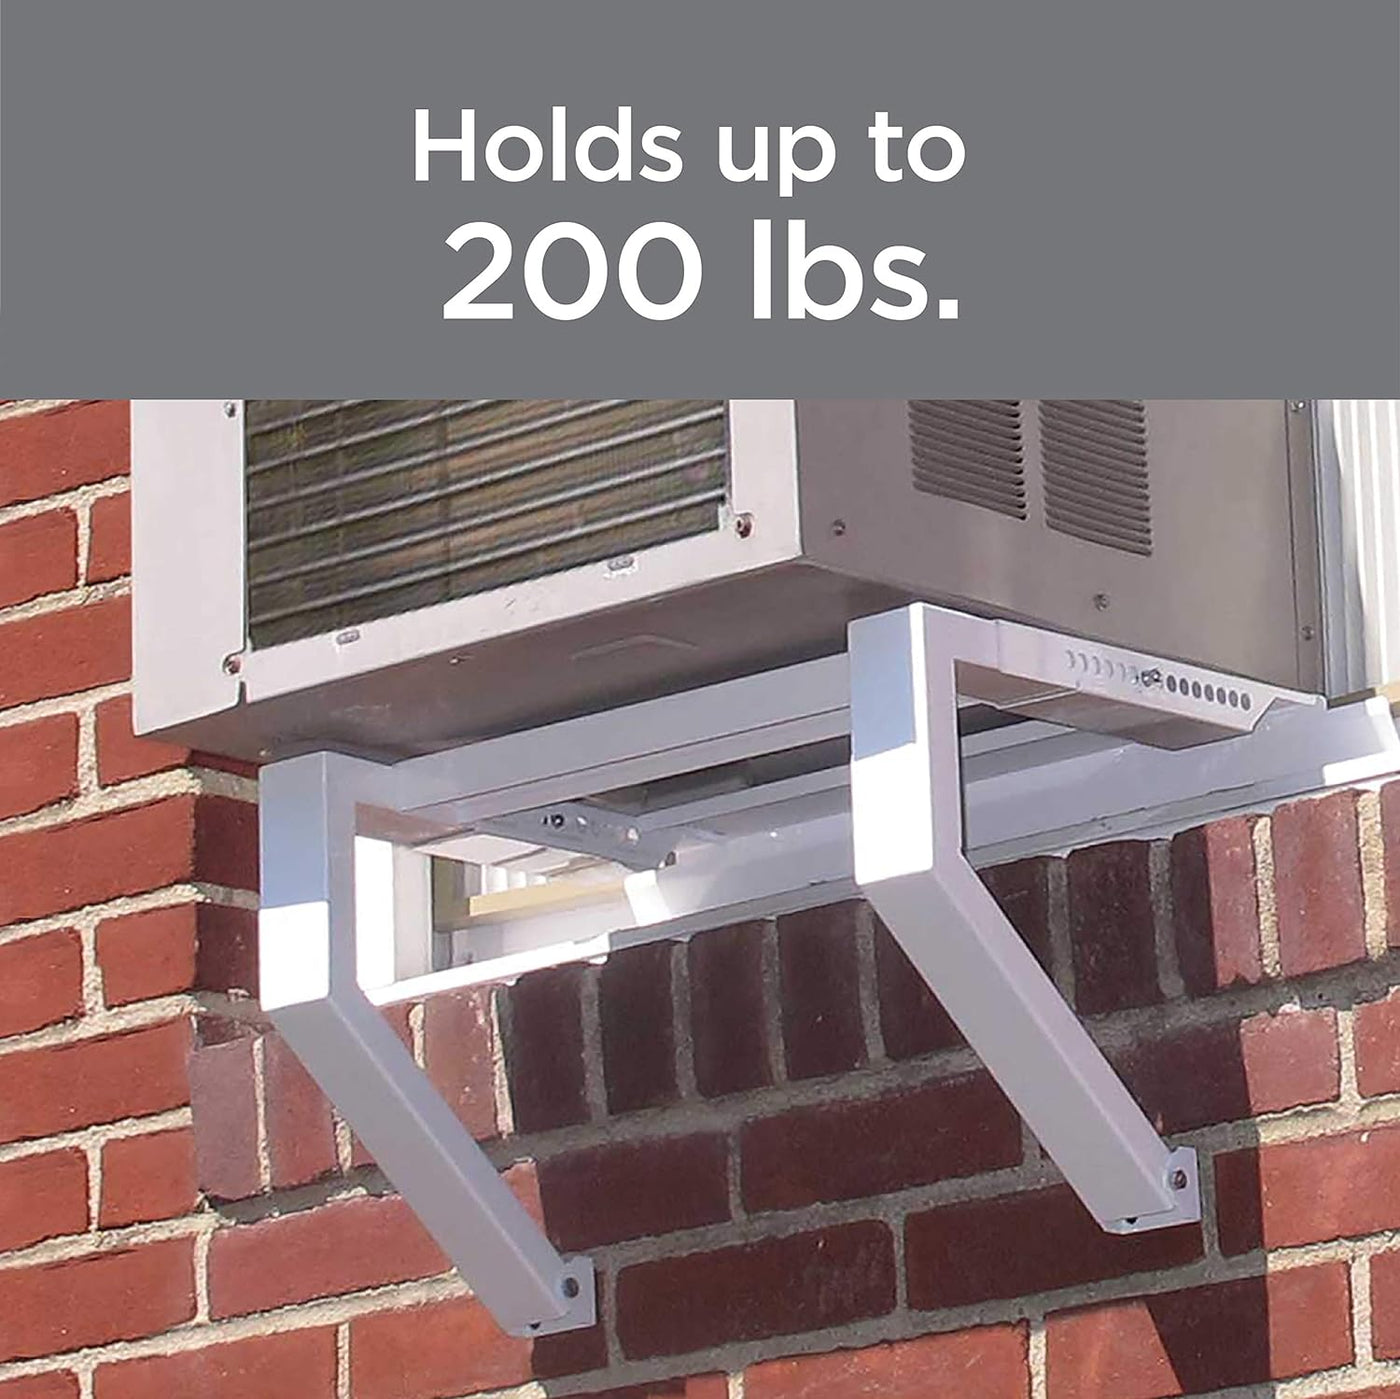 Top Shelf TSB-2438 Universal Window Air Conditioner AC Support Bracket Up to 200 lbs - $60